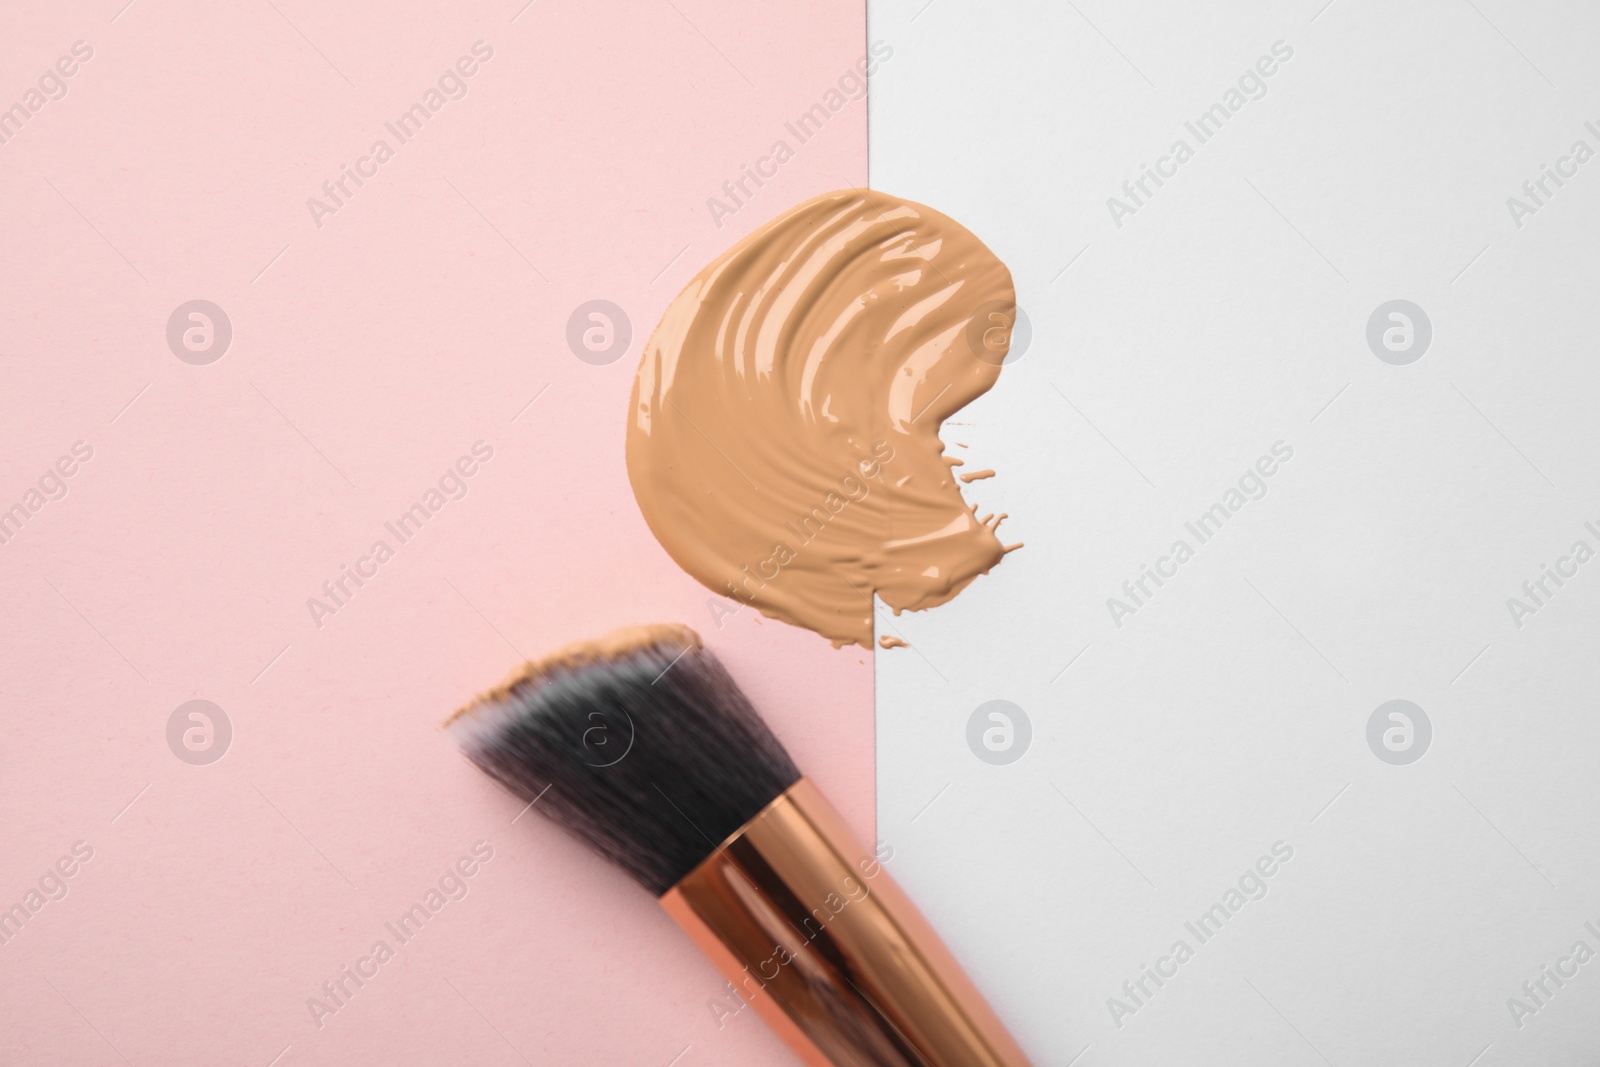 Photo of Sample of liquid foundation and makeup brush on color background, top view